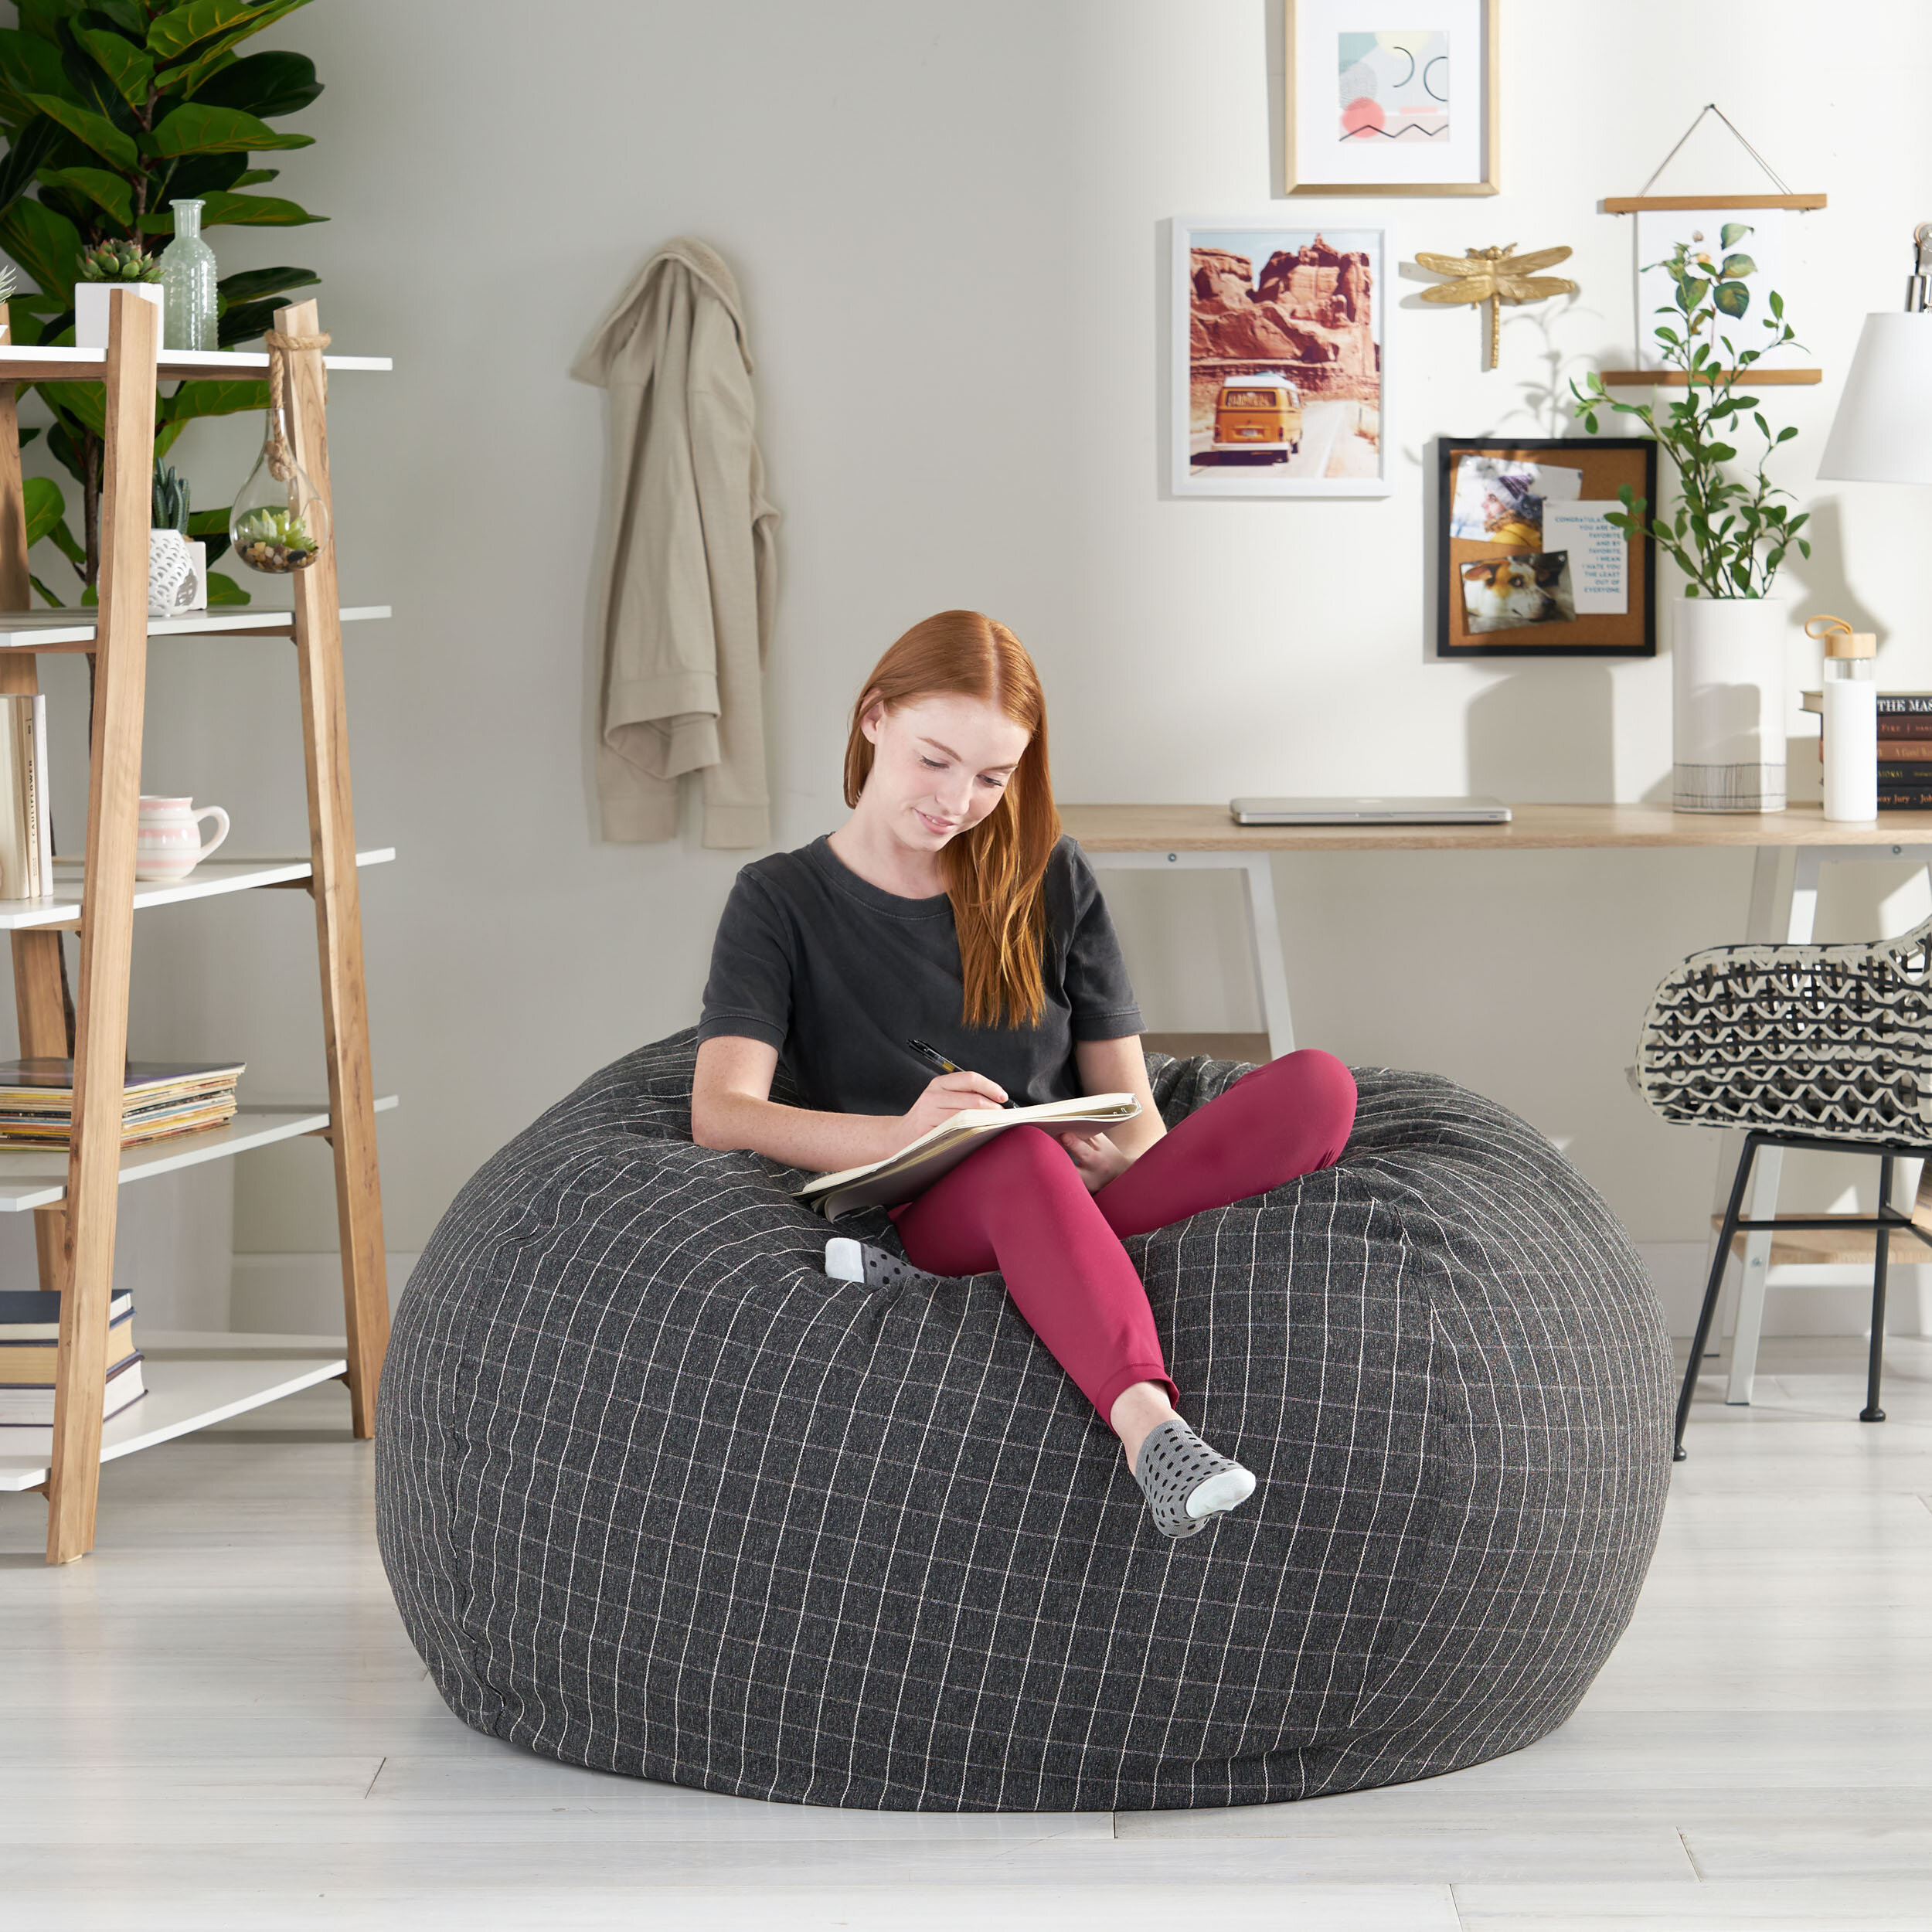 6' Huge Bean Bag Chair With Memory Foam Filling And Washable Cover - Relax  Sacks : Target